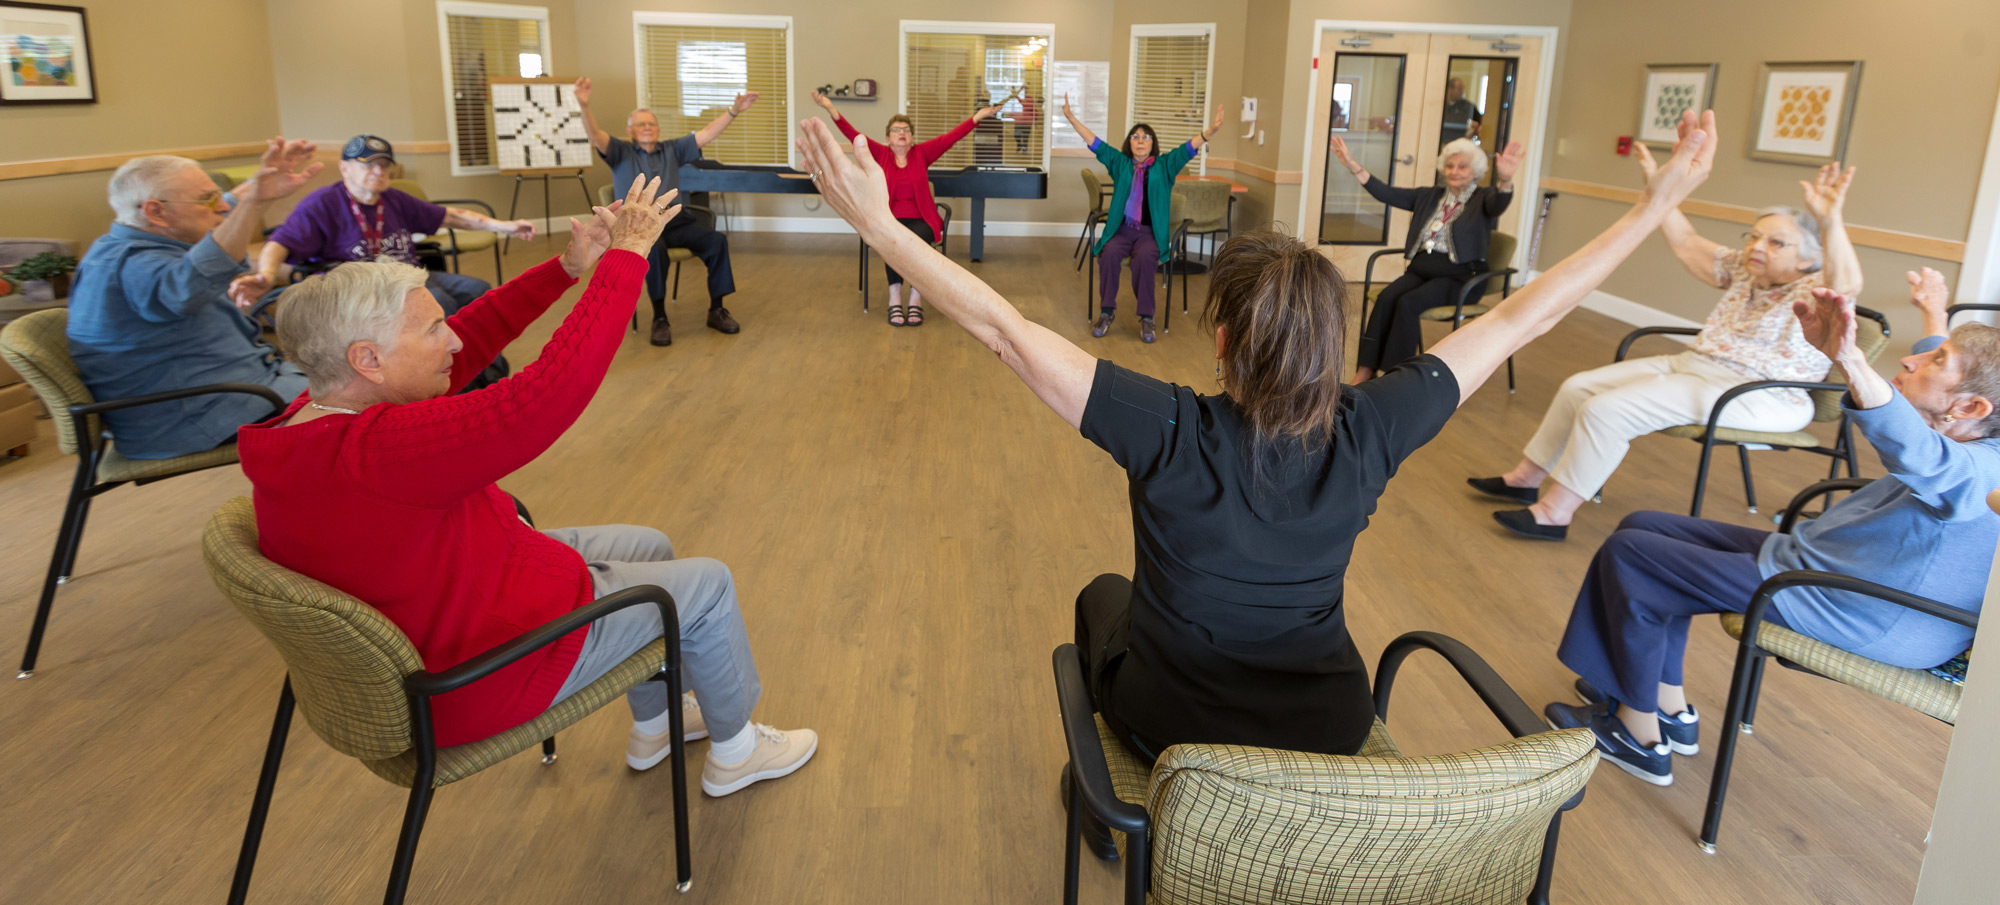 StoryPoint senior living community group exercise class